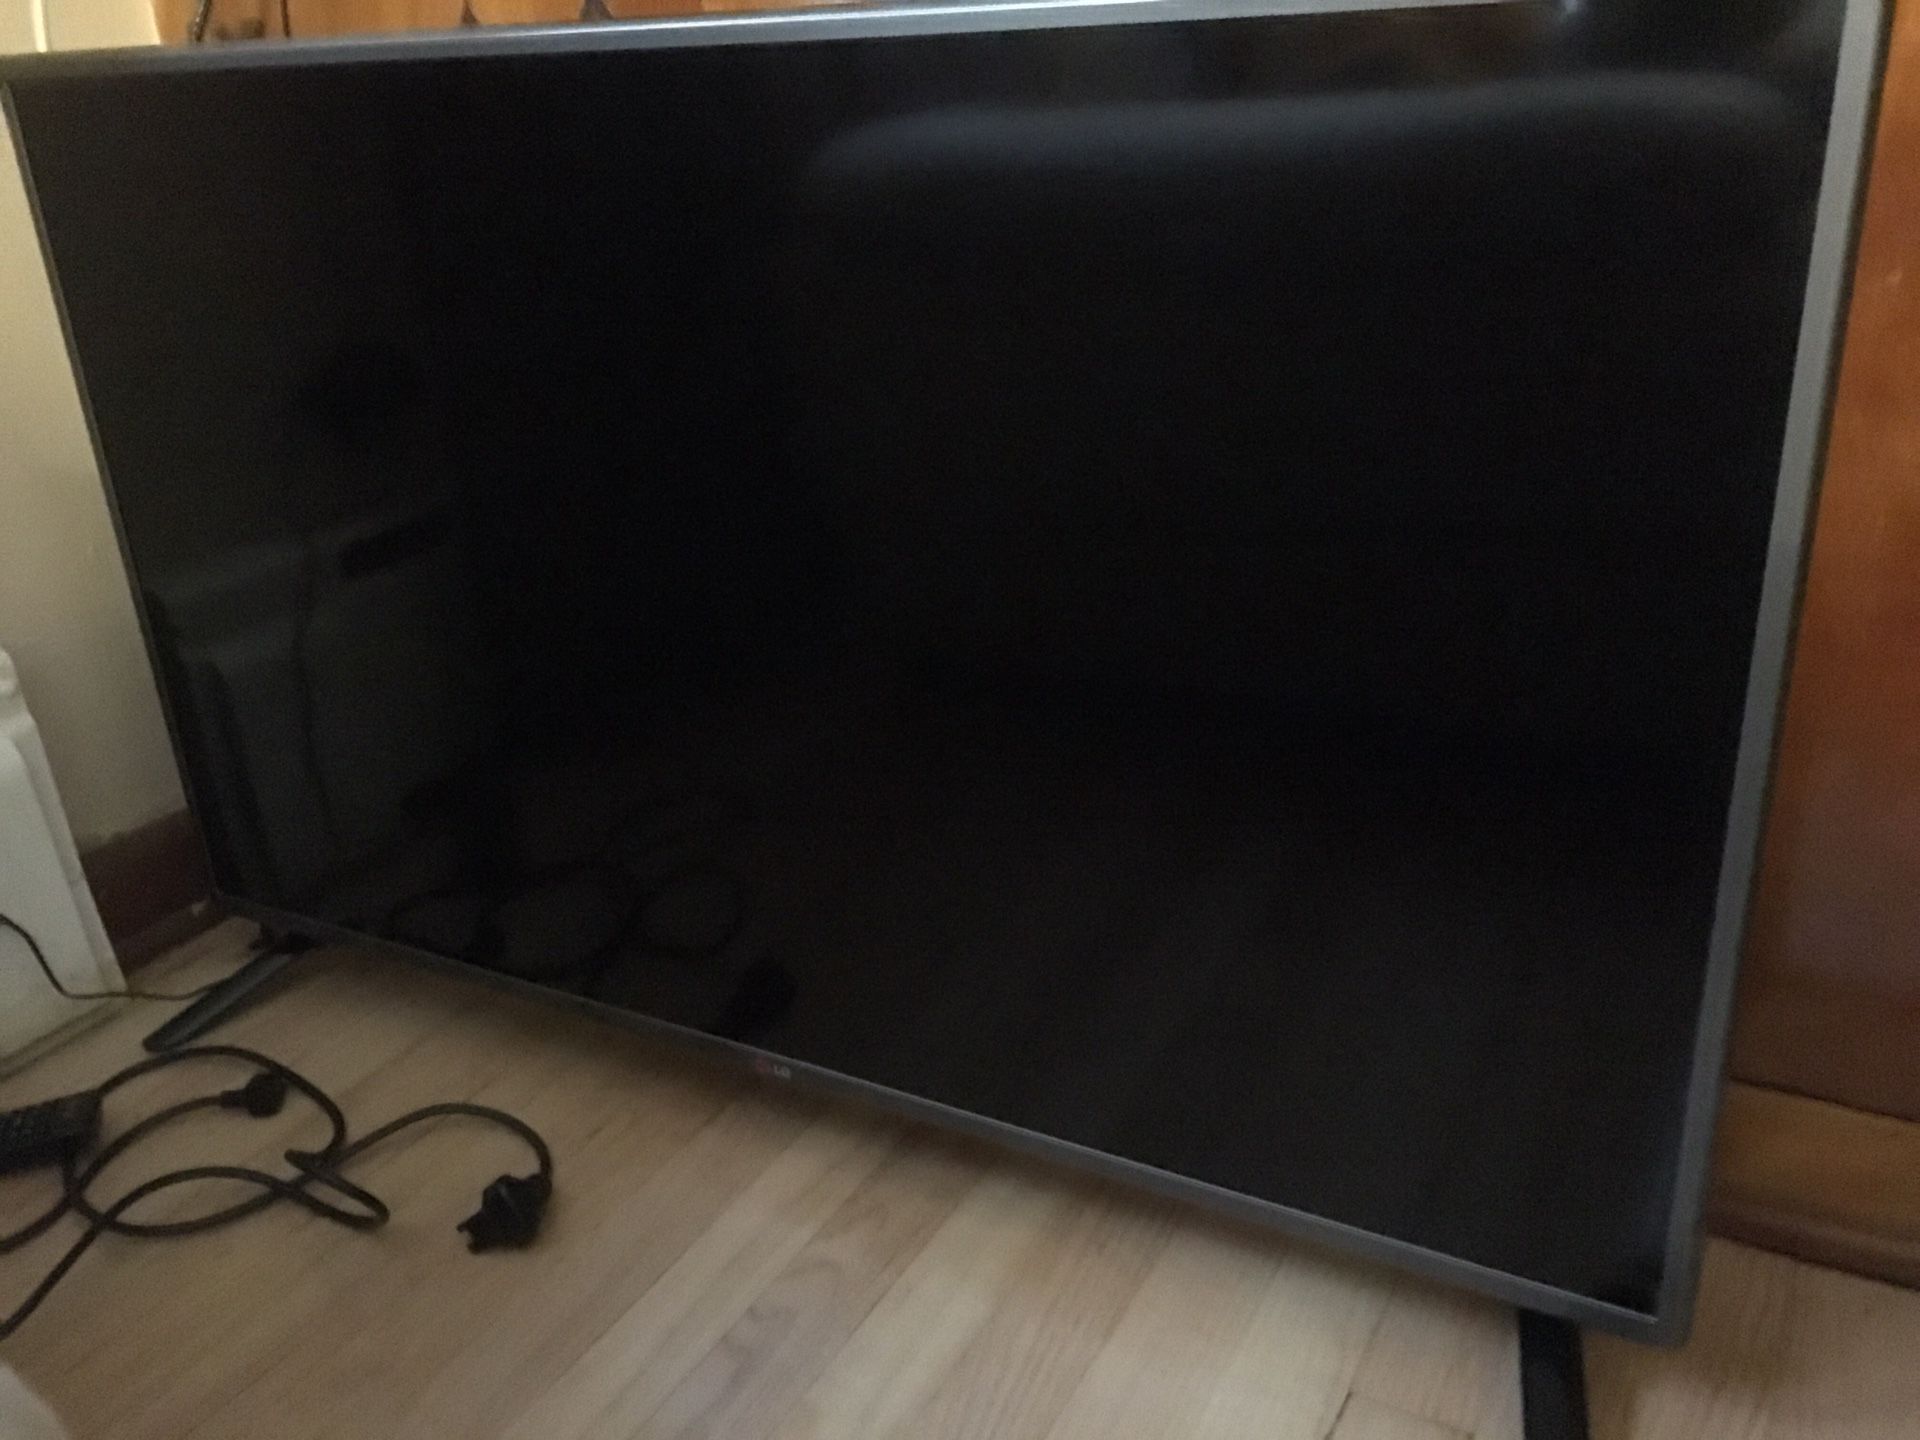 42” LG TV - sound works but no picture